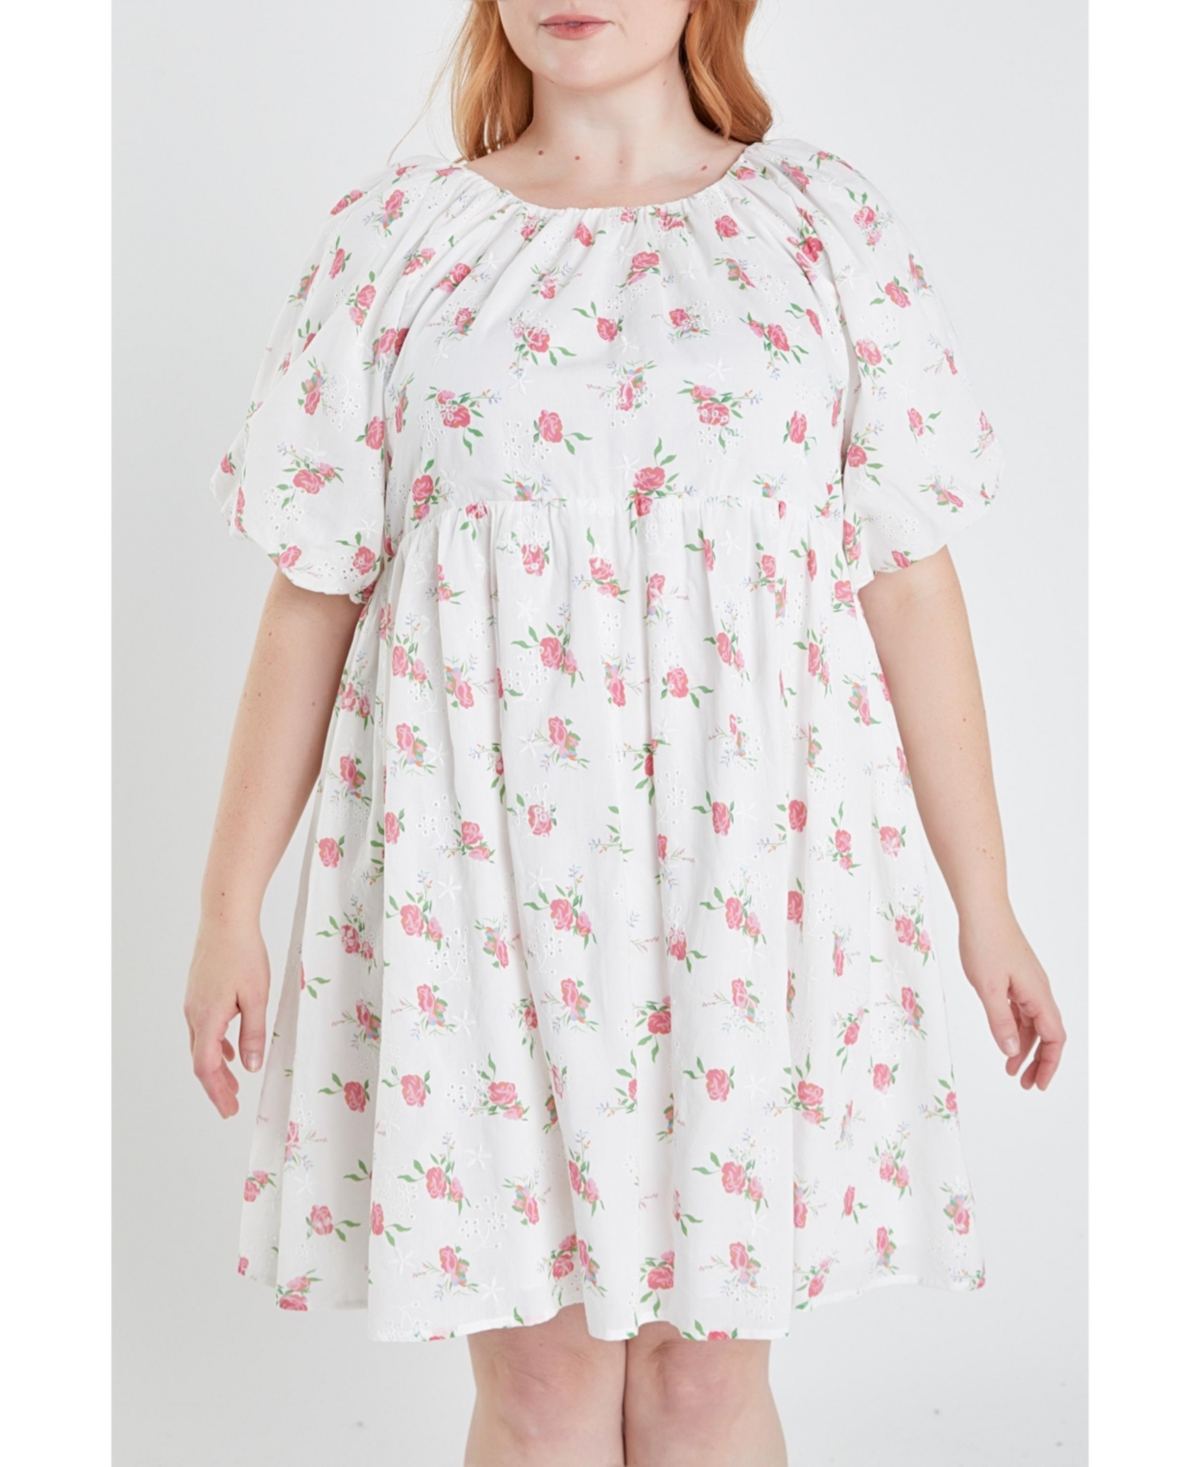 ENGLISH FACTORY WOMEN'S PLUS SIZE FLORAL COTTON EMBROIDERED DRESS